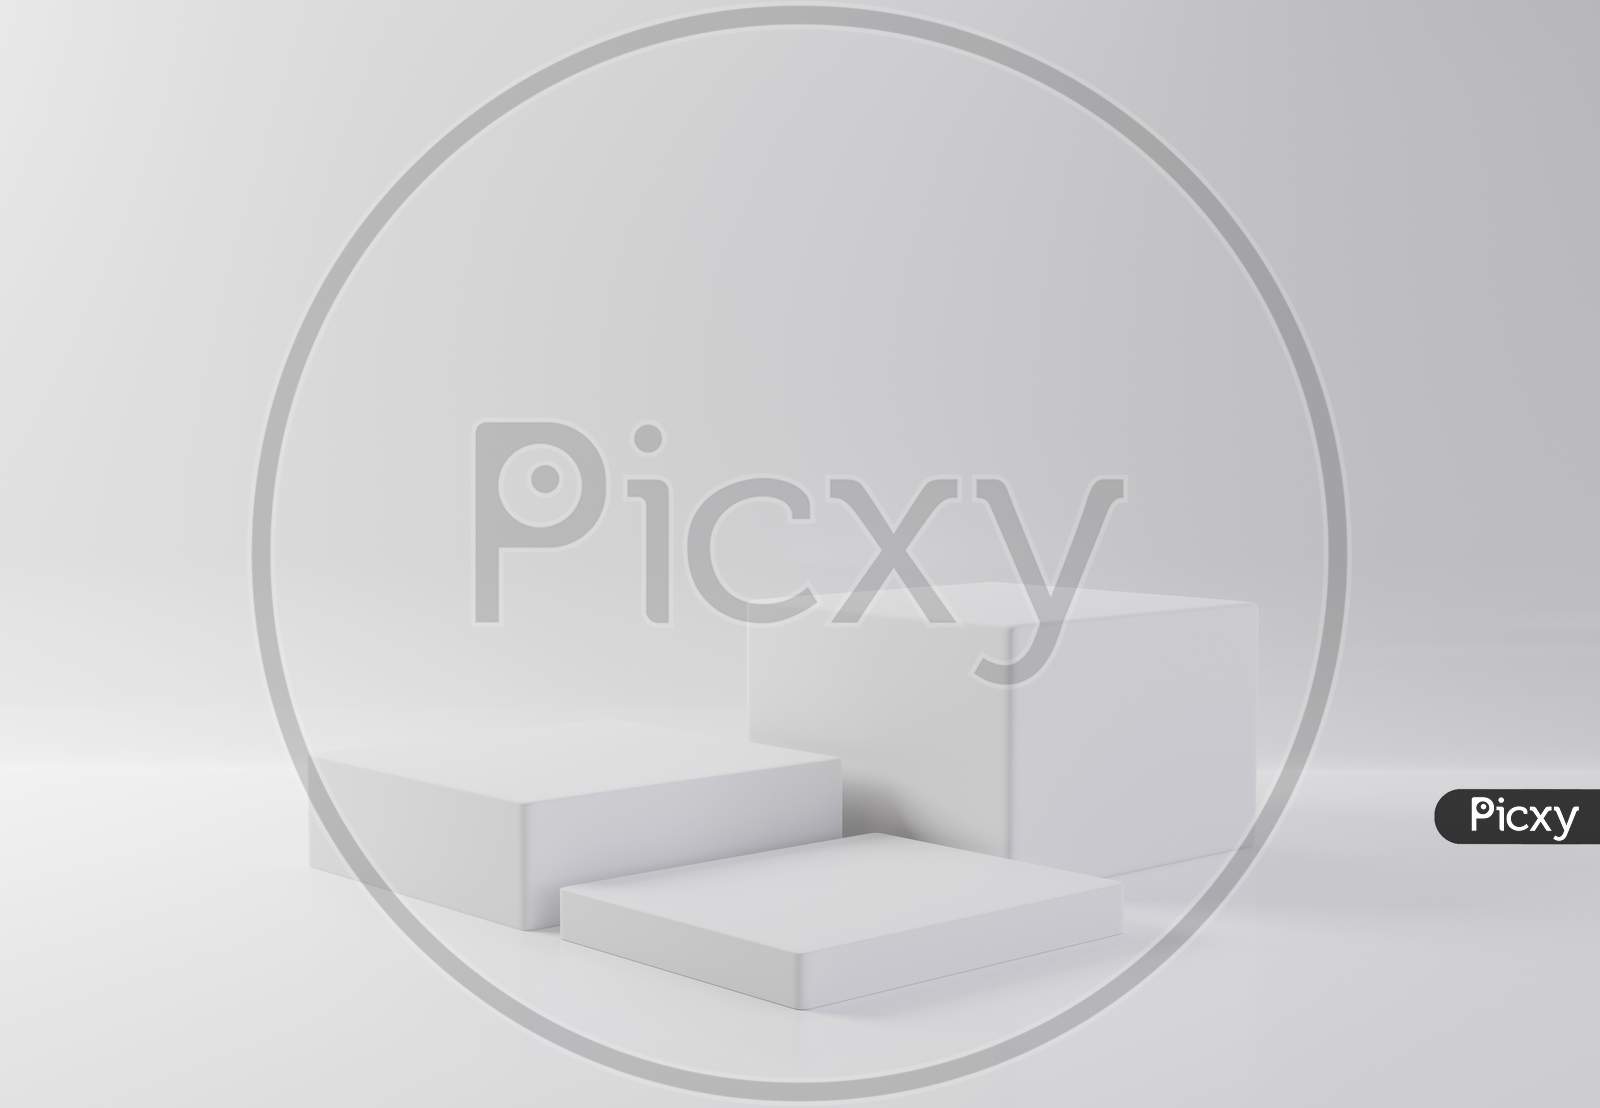 White Rectangle Cube Product Showcase Table On Isolate Background. Abstract Minimal Geometry Concept. Studio Podium Platform. Exhibition And Business Presentation Stage. 3D Illustration Render Graphic